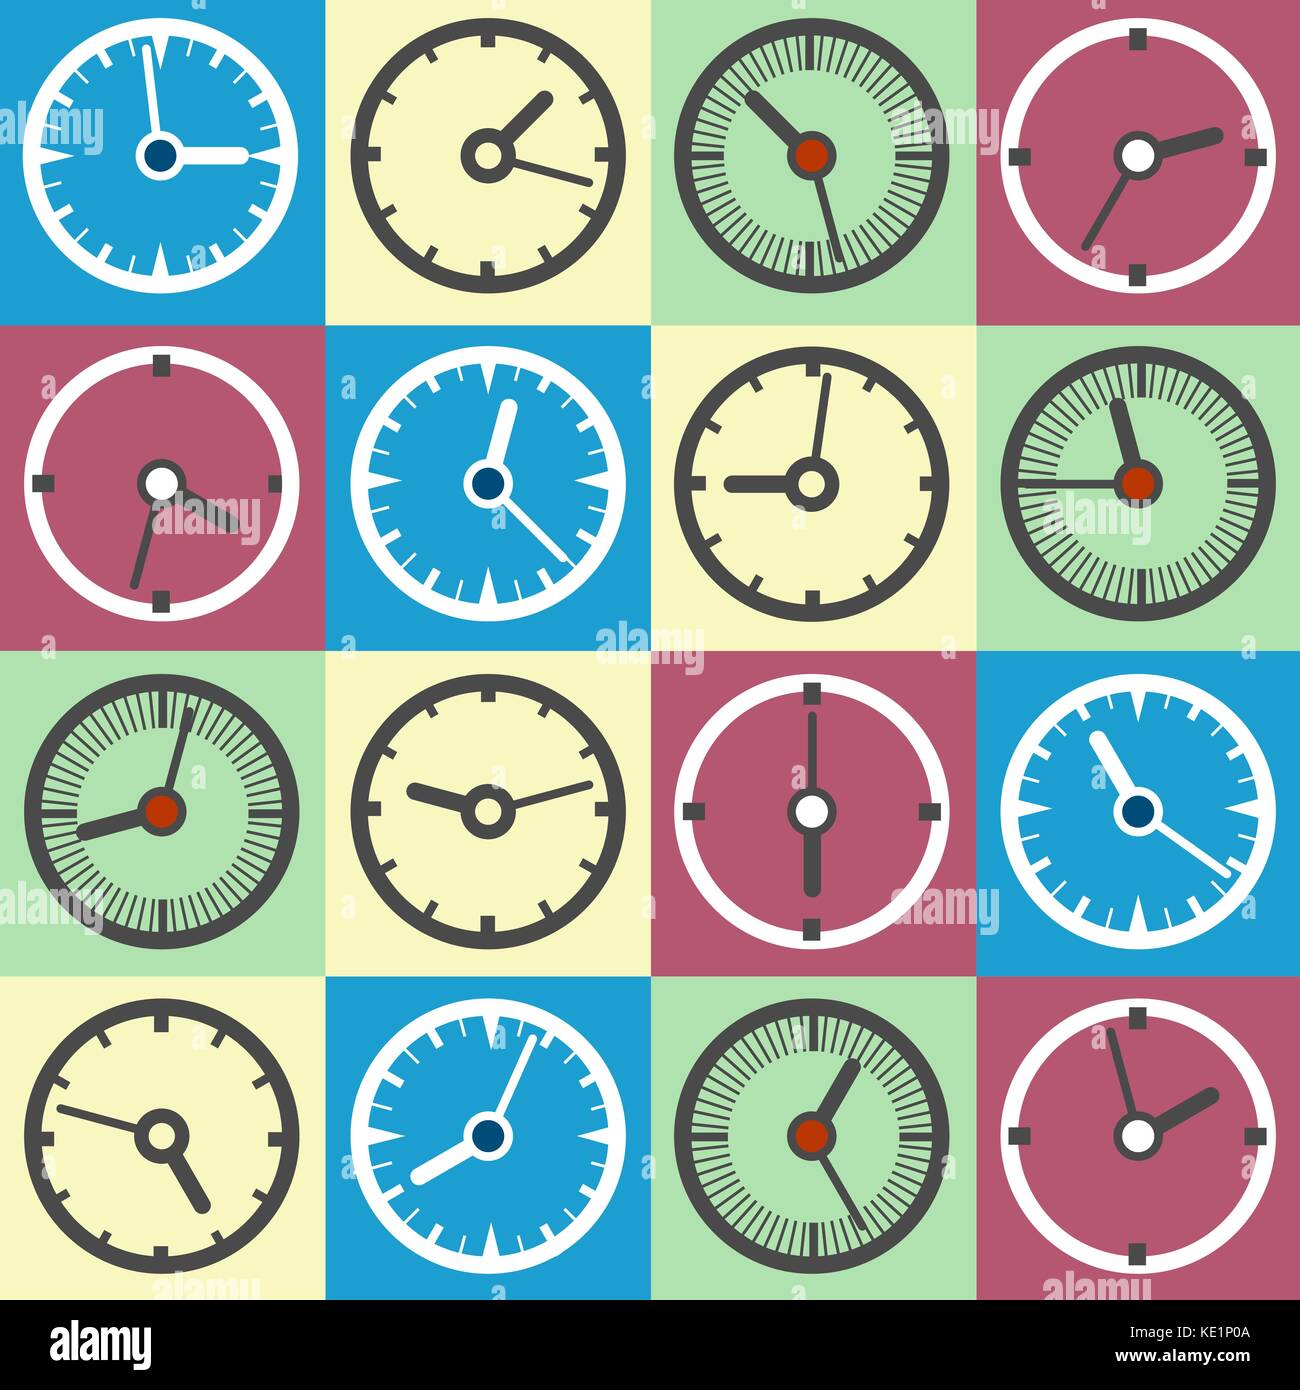 Colorful clock icons Stock Vector